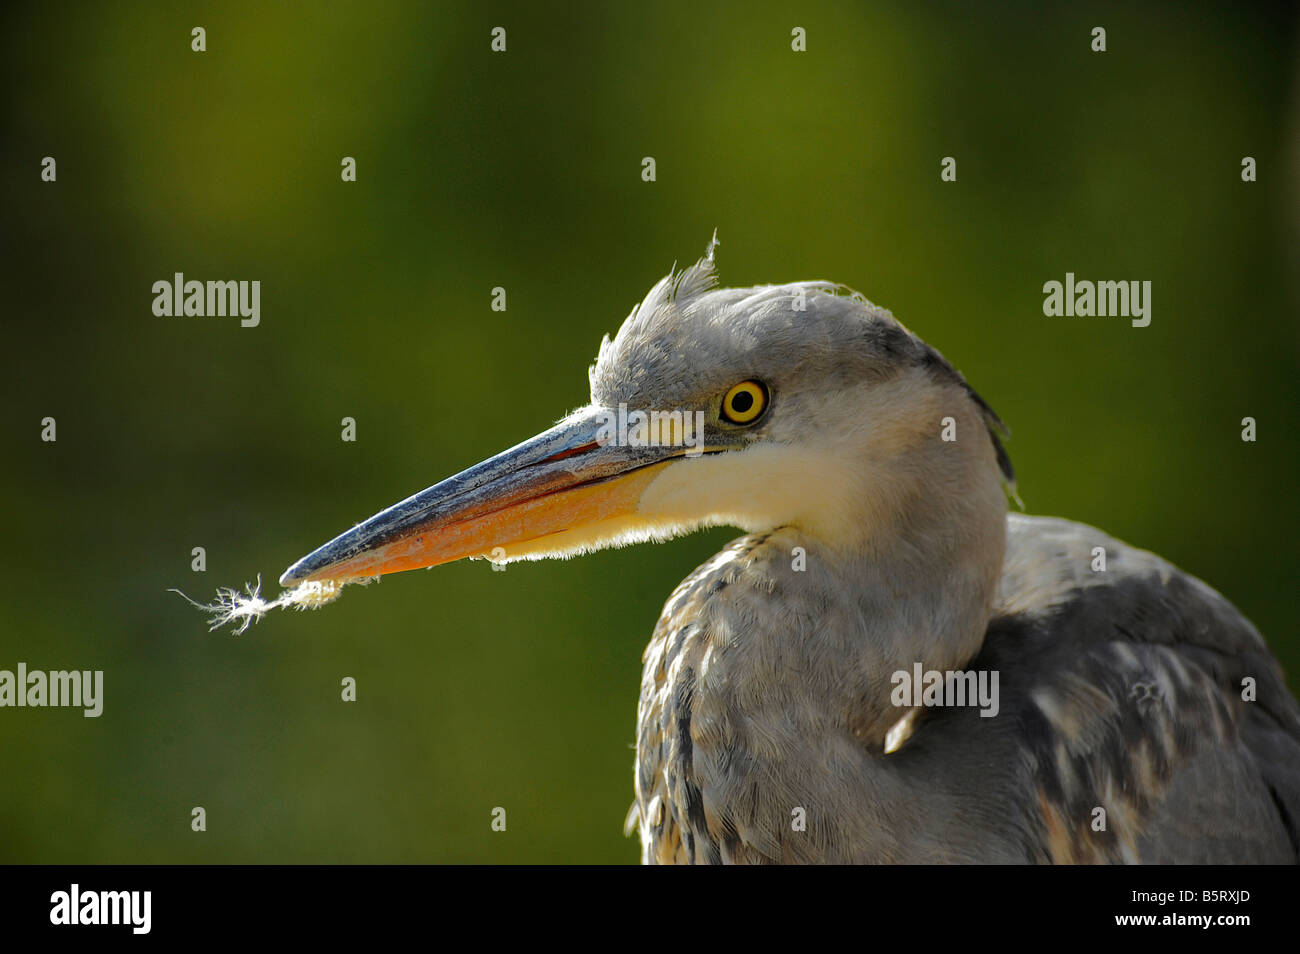 Dagger like bill of grey heron Ardea cinerea with remains of feathers after preening Stock Photo